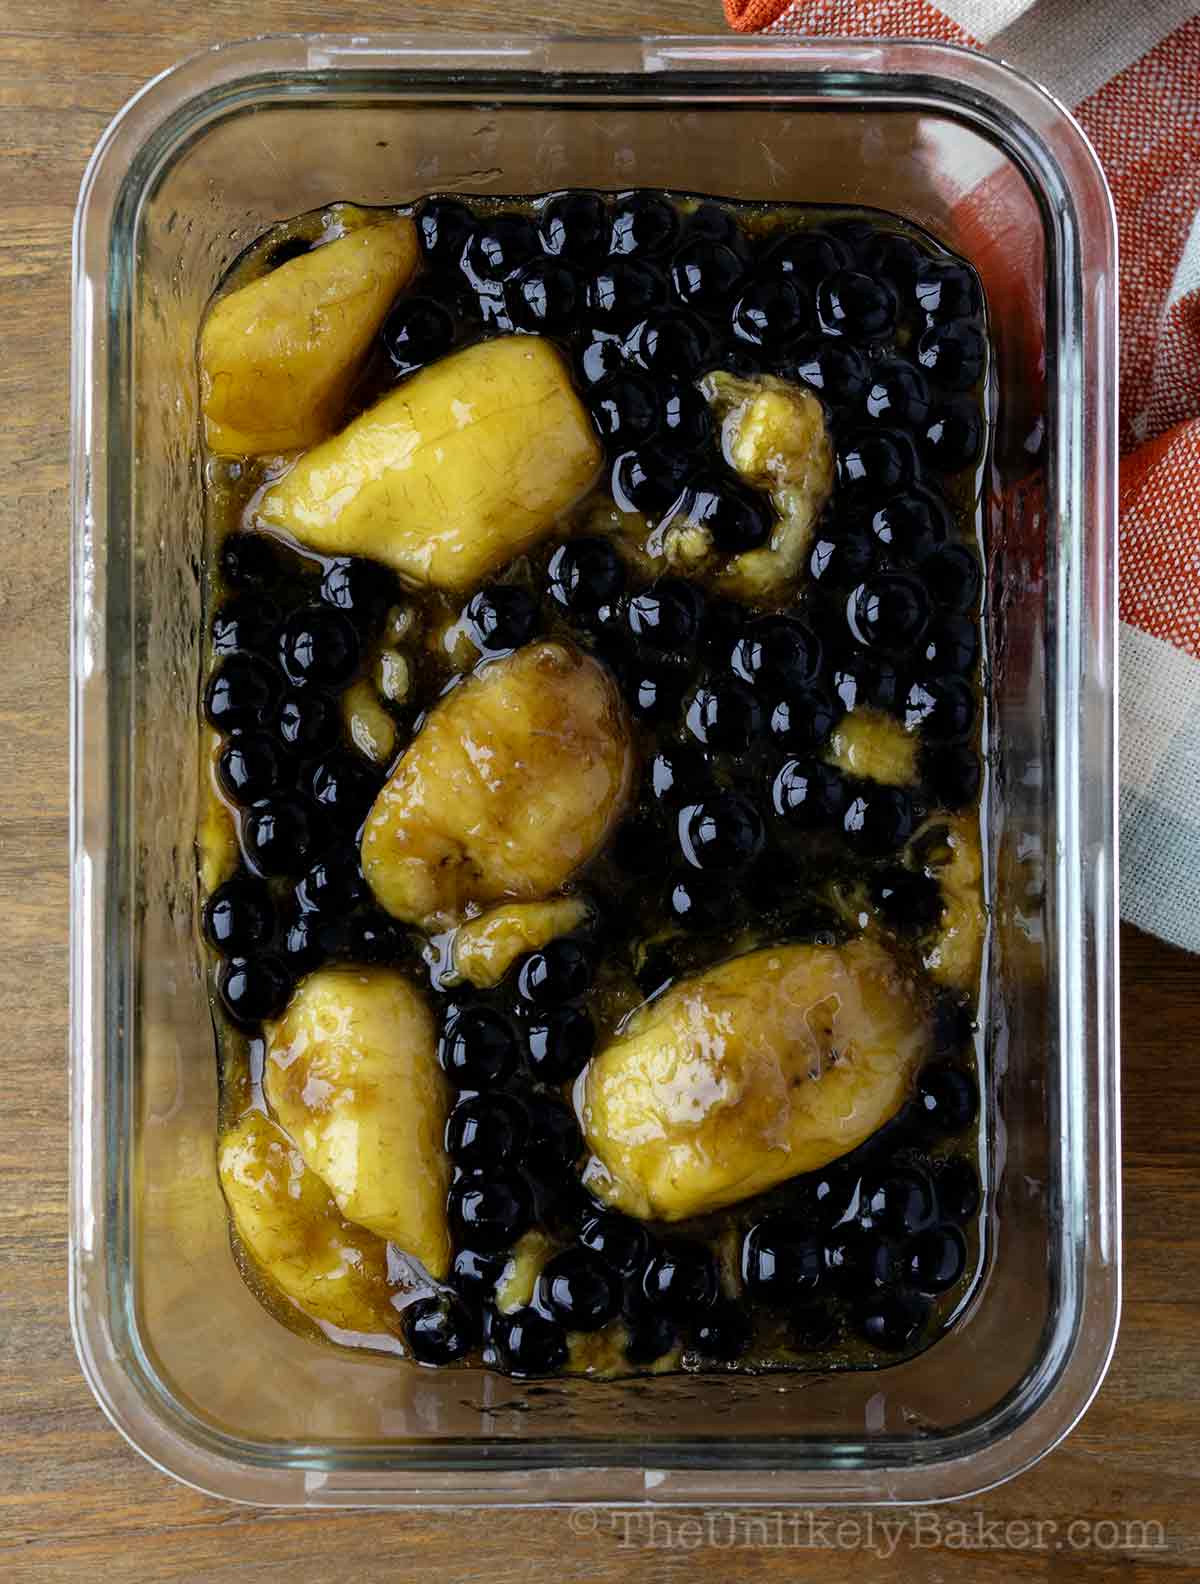 A container filled with minatamis na saging with sago.